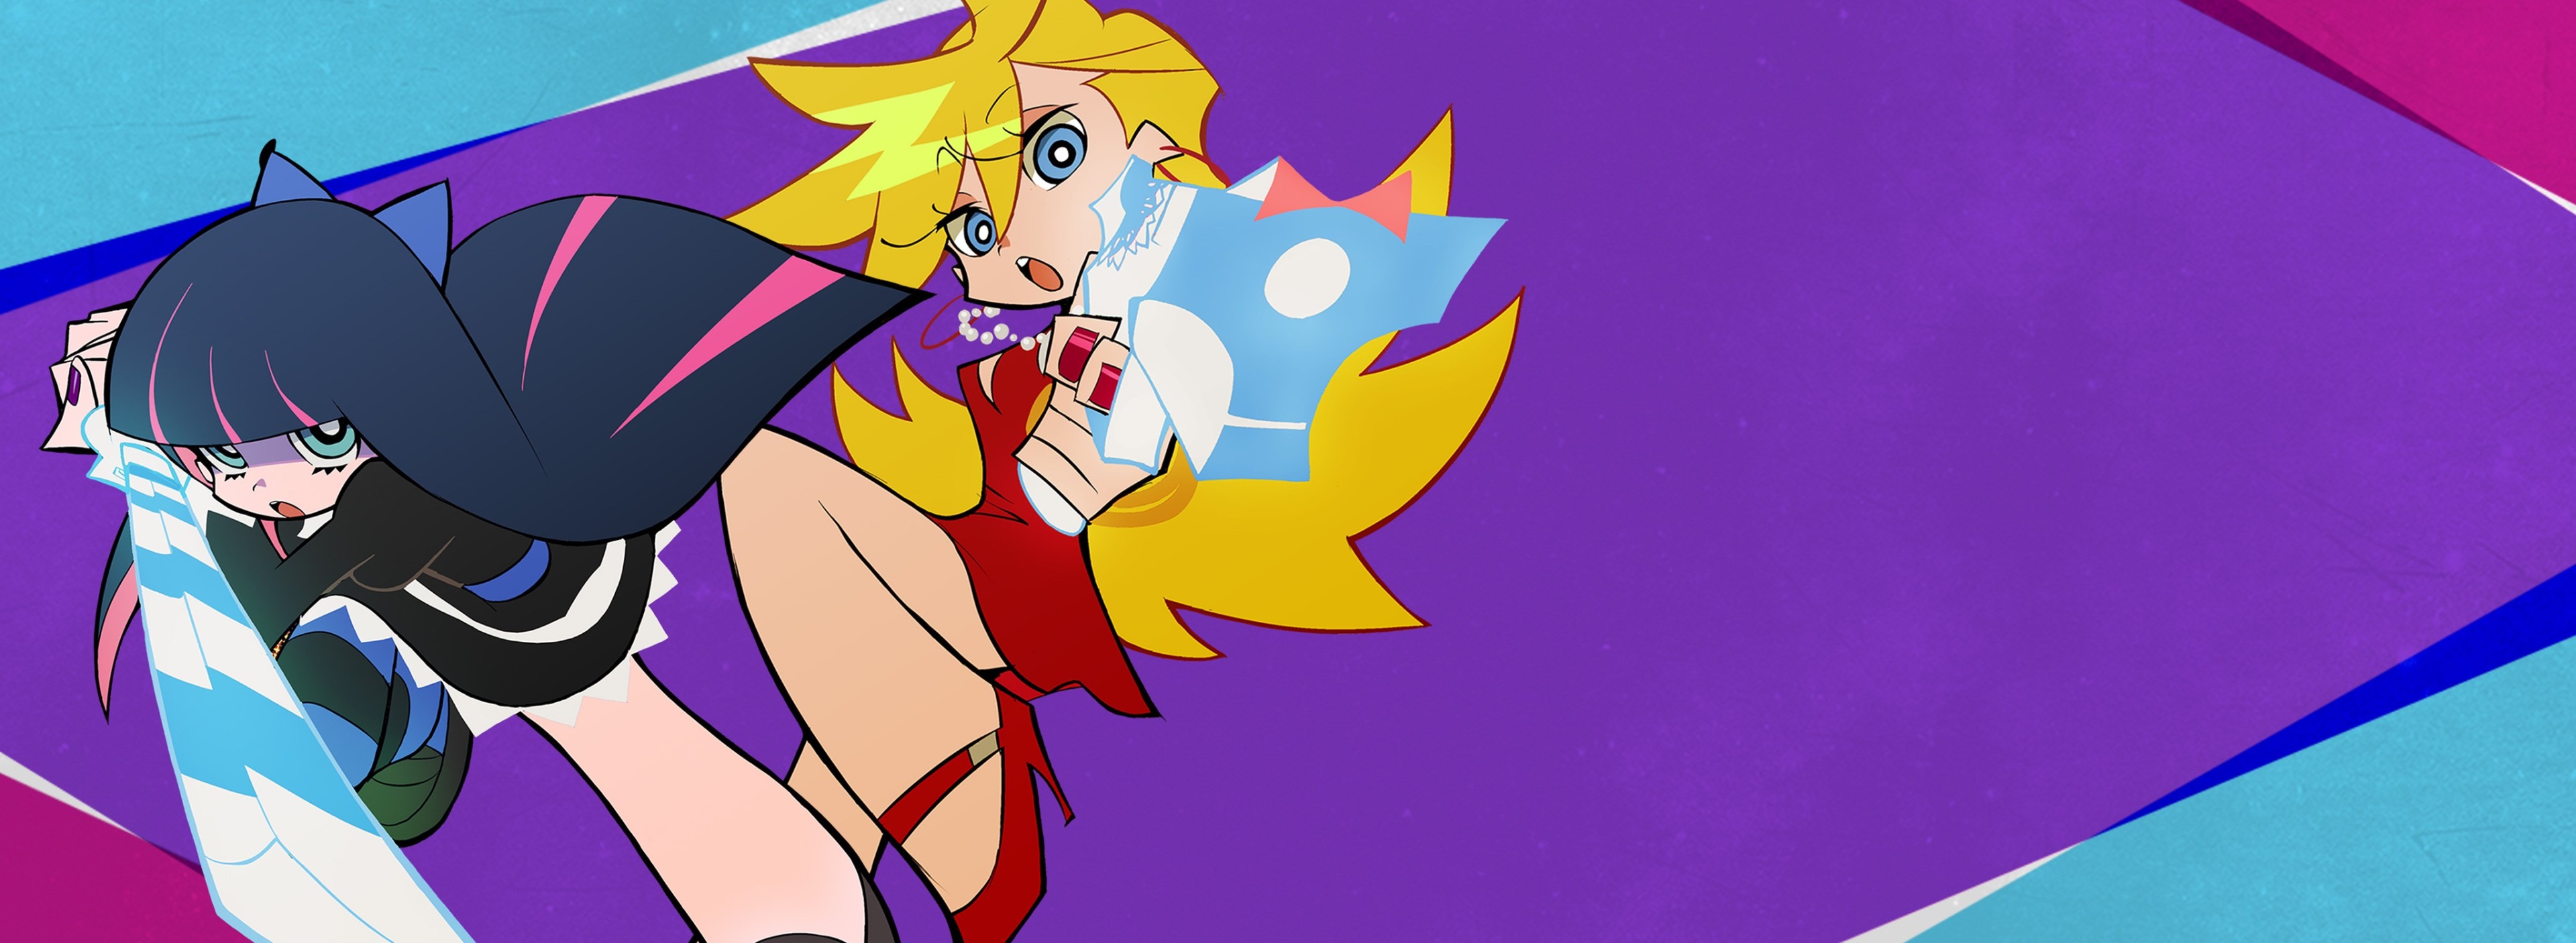 Panty Amp Stocking With Garterbelt 4k Cool Wallpaper - Panty And Stocking With Garterbelt , HD Wallpaper & Backgrounds